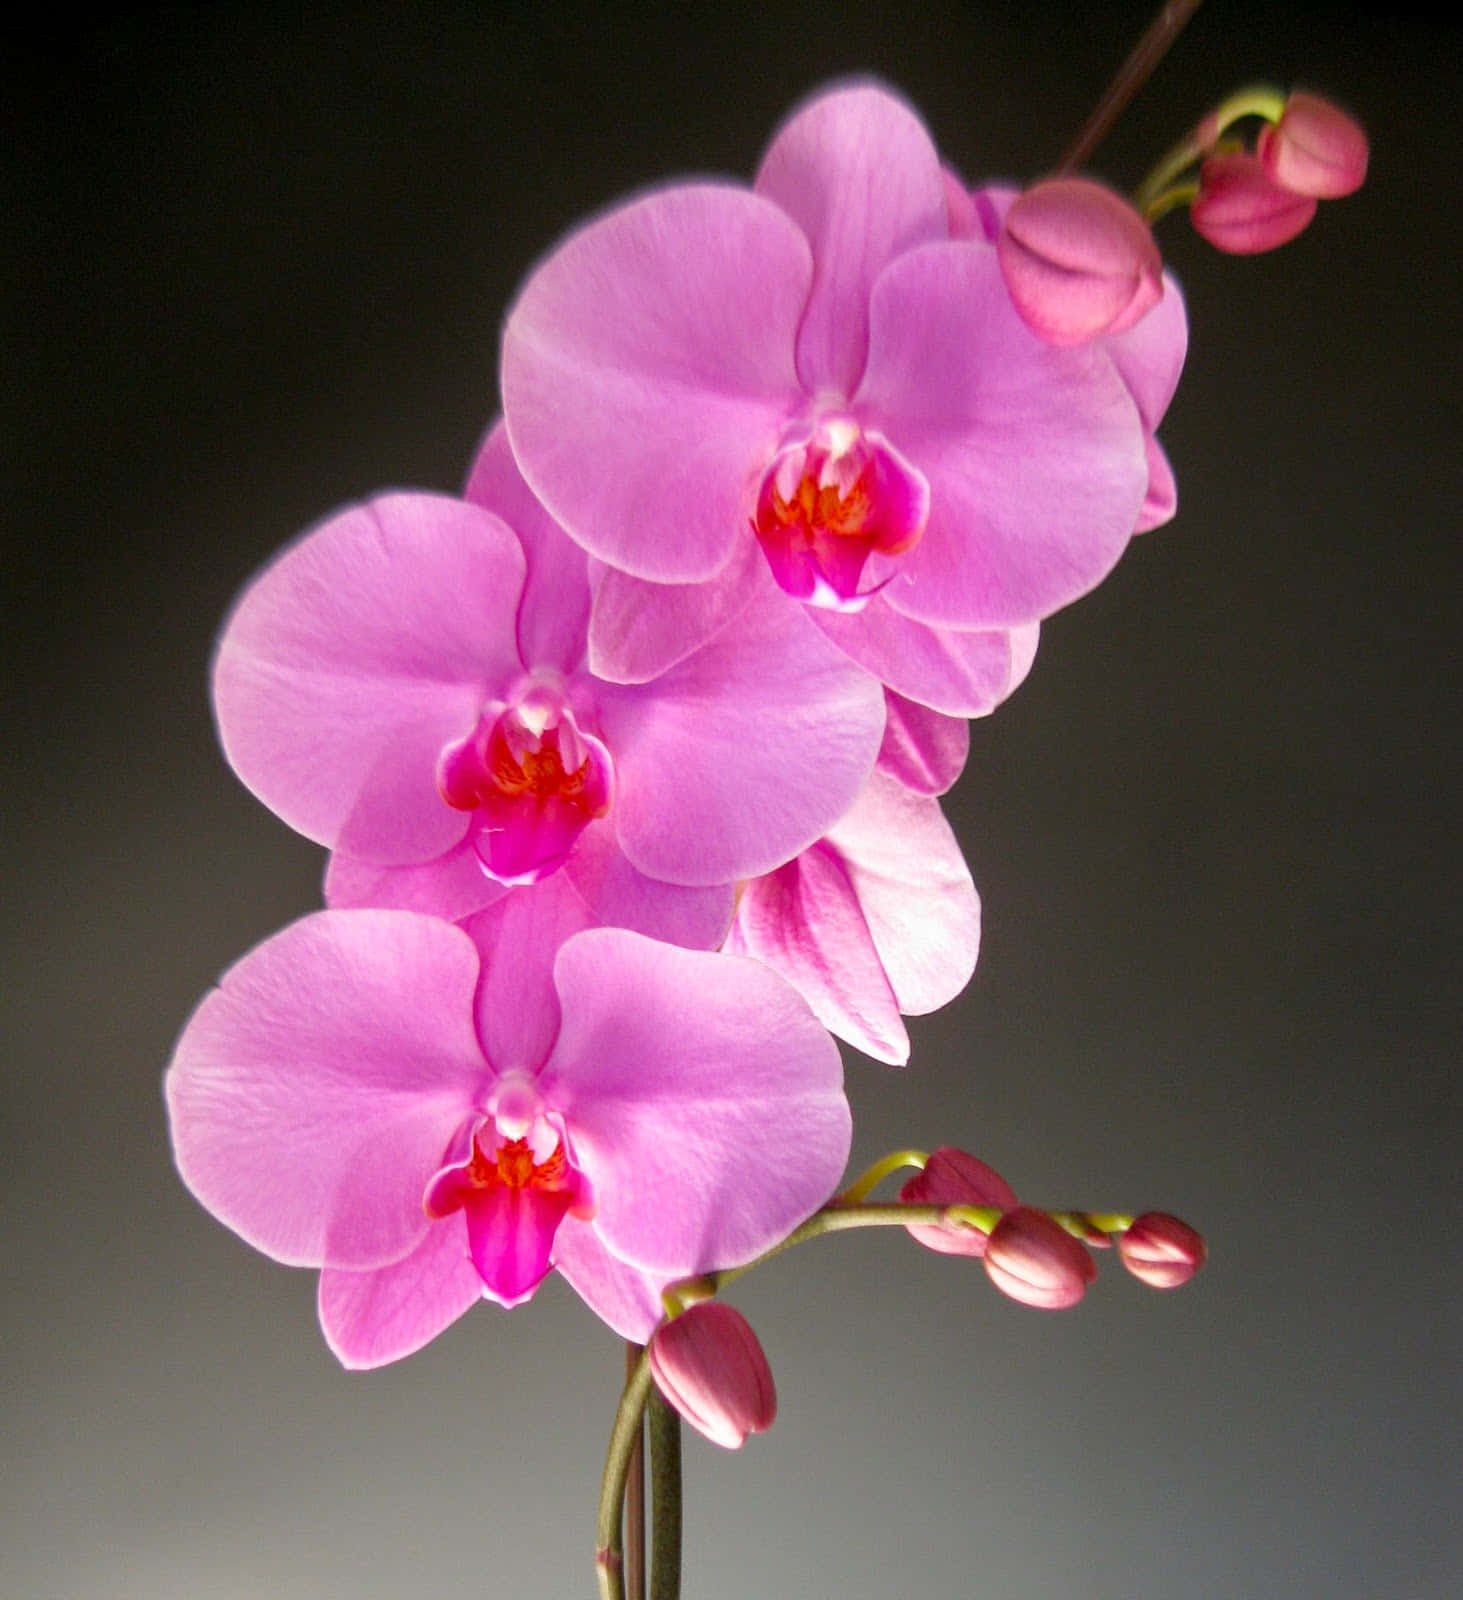 🌸  "A splash of color in the form of a beautiful Orchid flower"